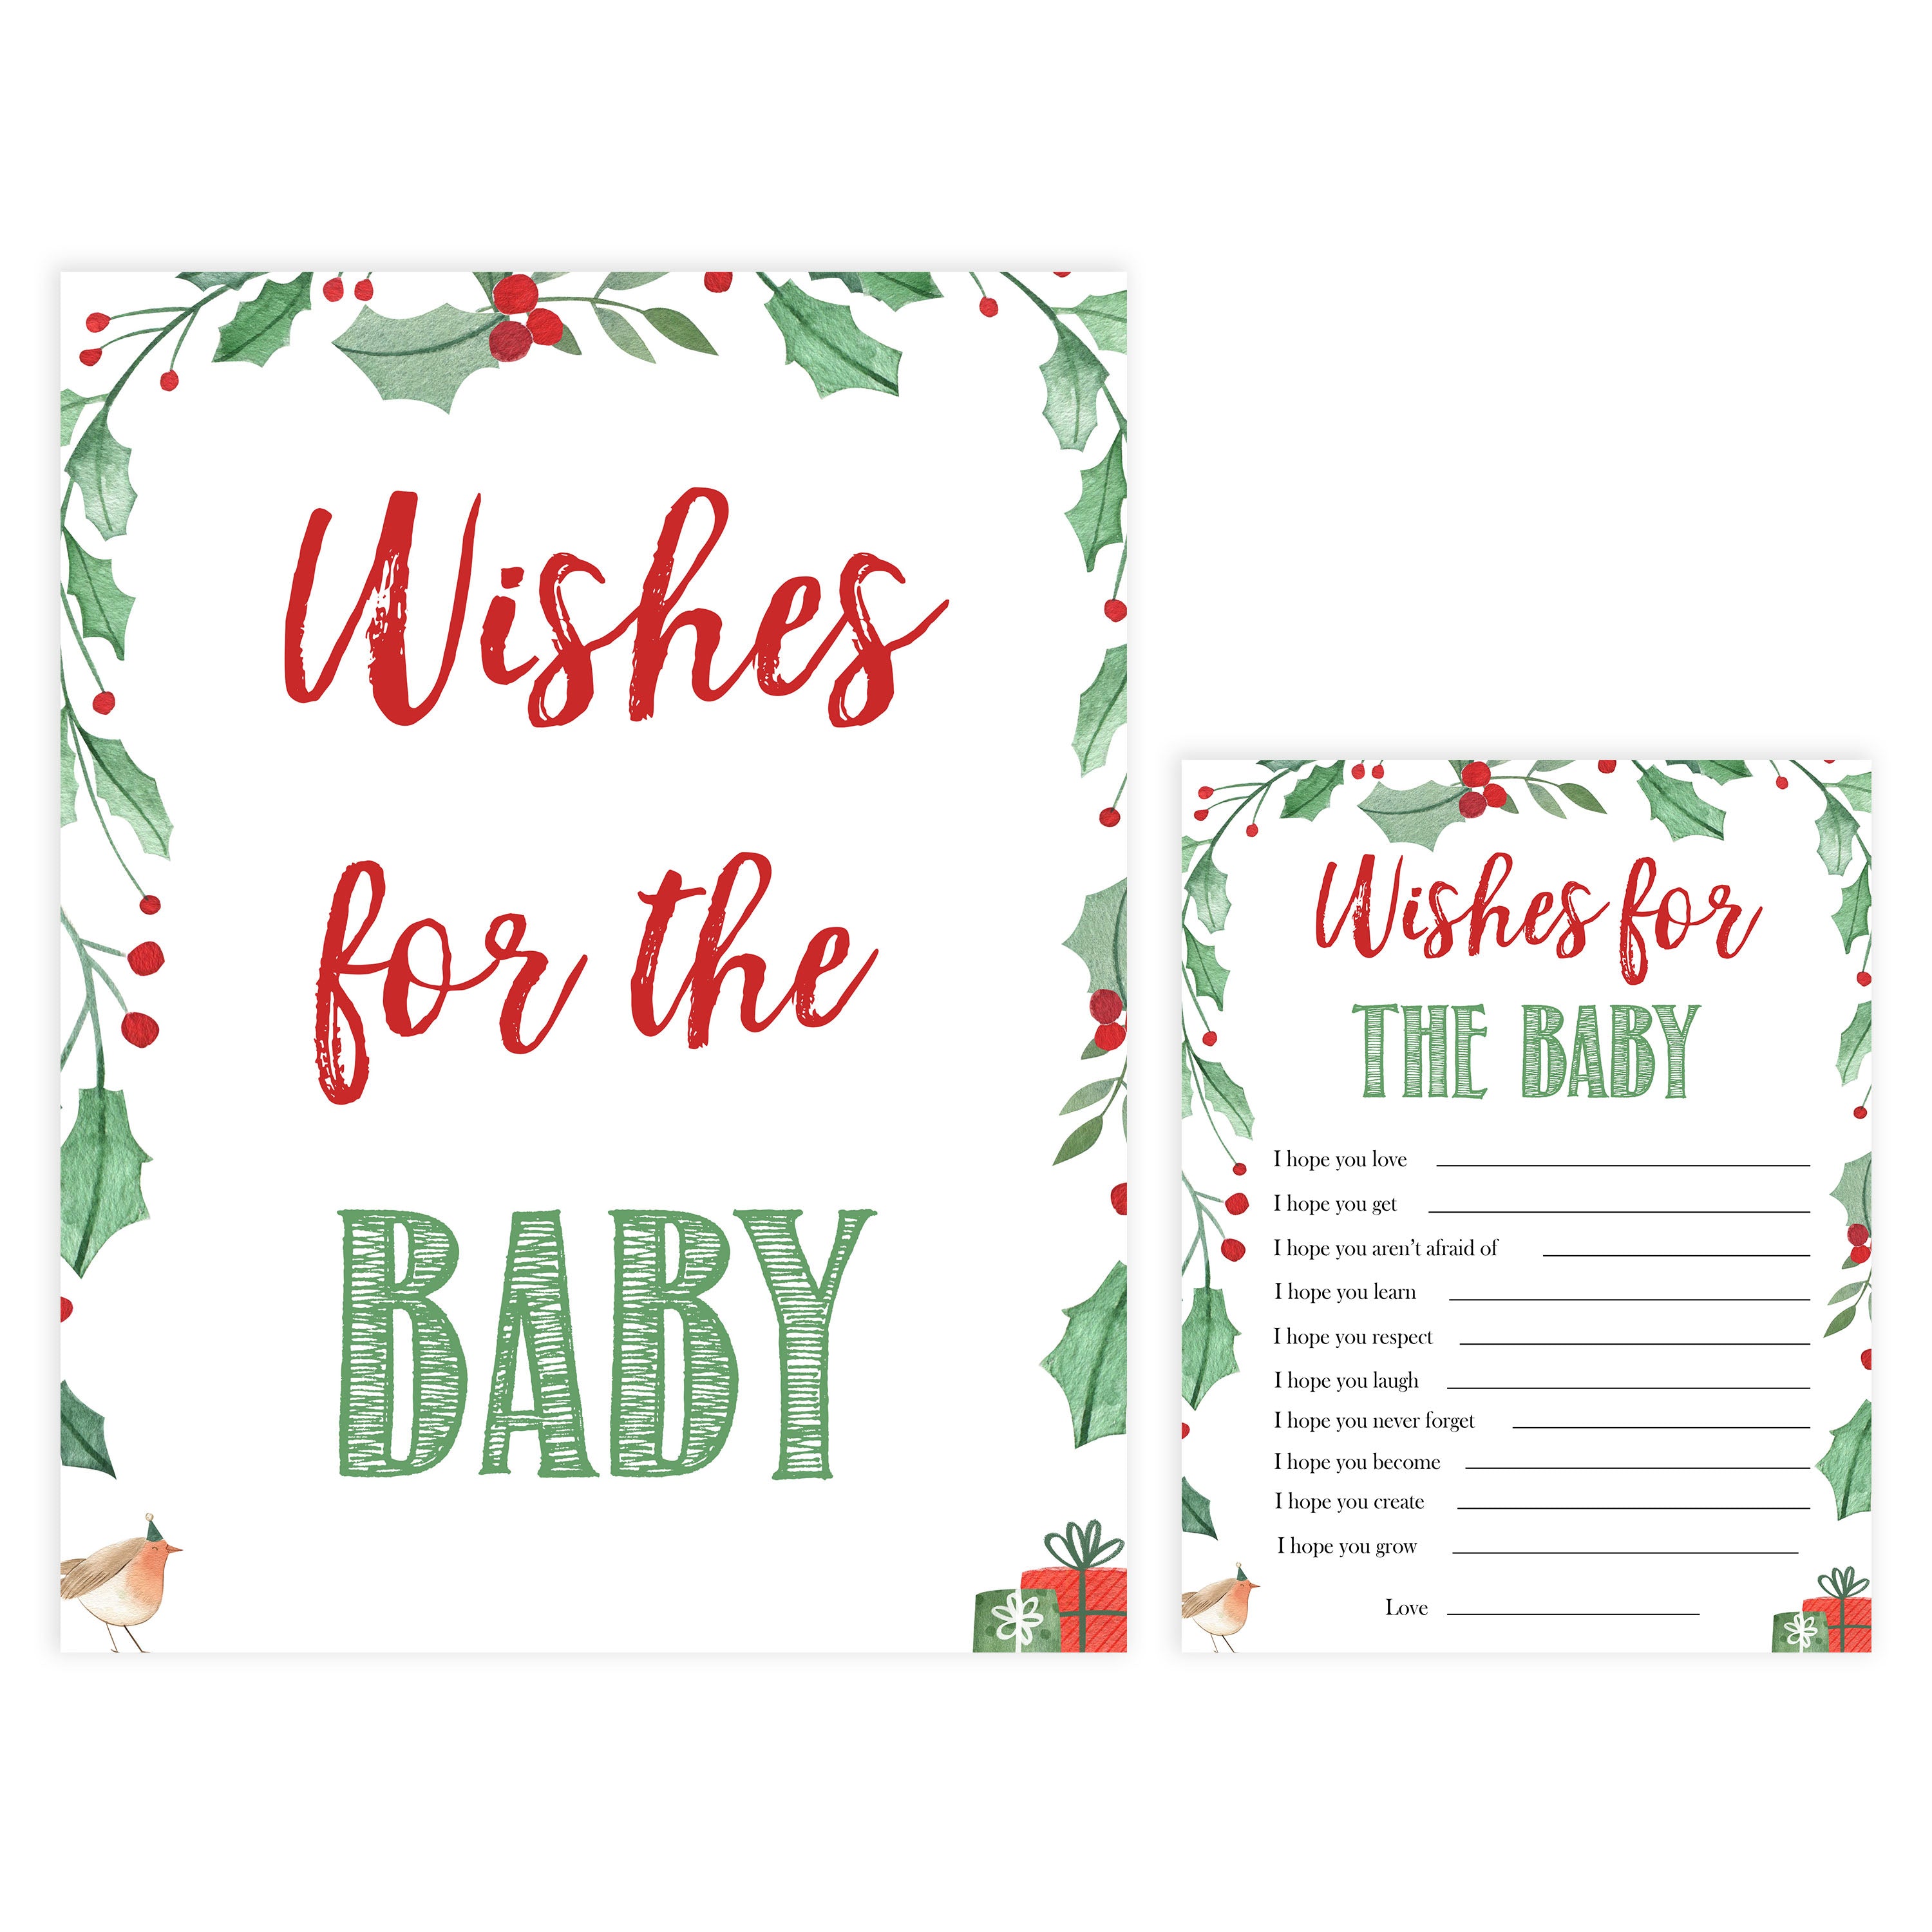 Christmas baby shower games, wishes for the baby, festive baby shower games, best baby shower games, top 10 baby games, baby shower ideas, baby shower games